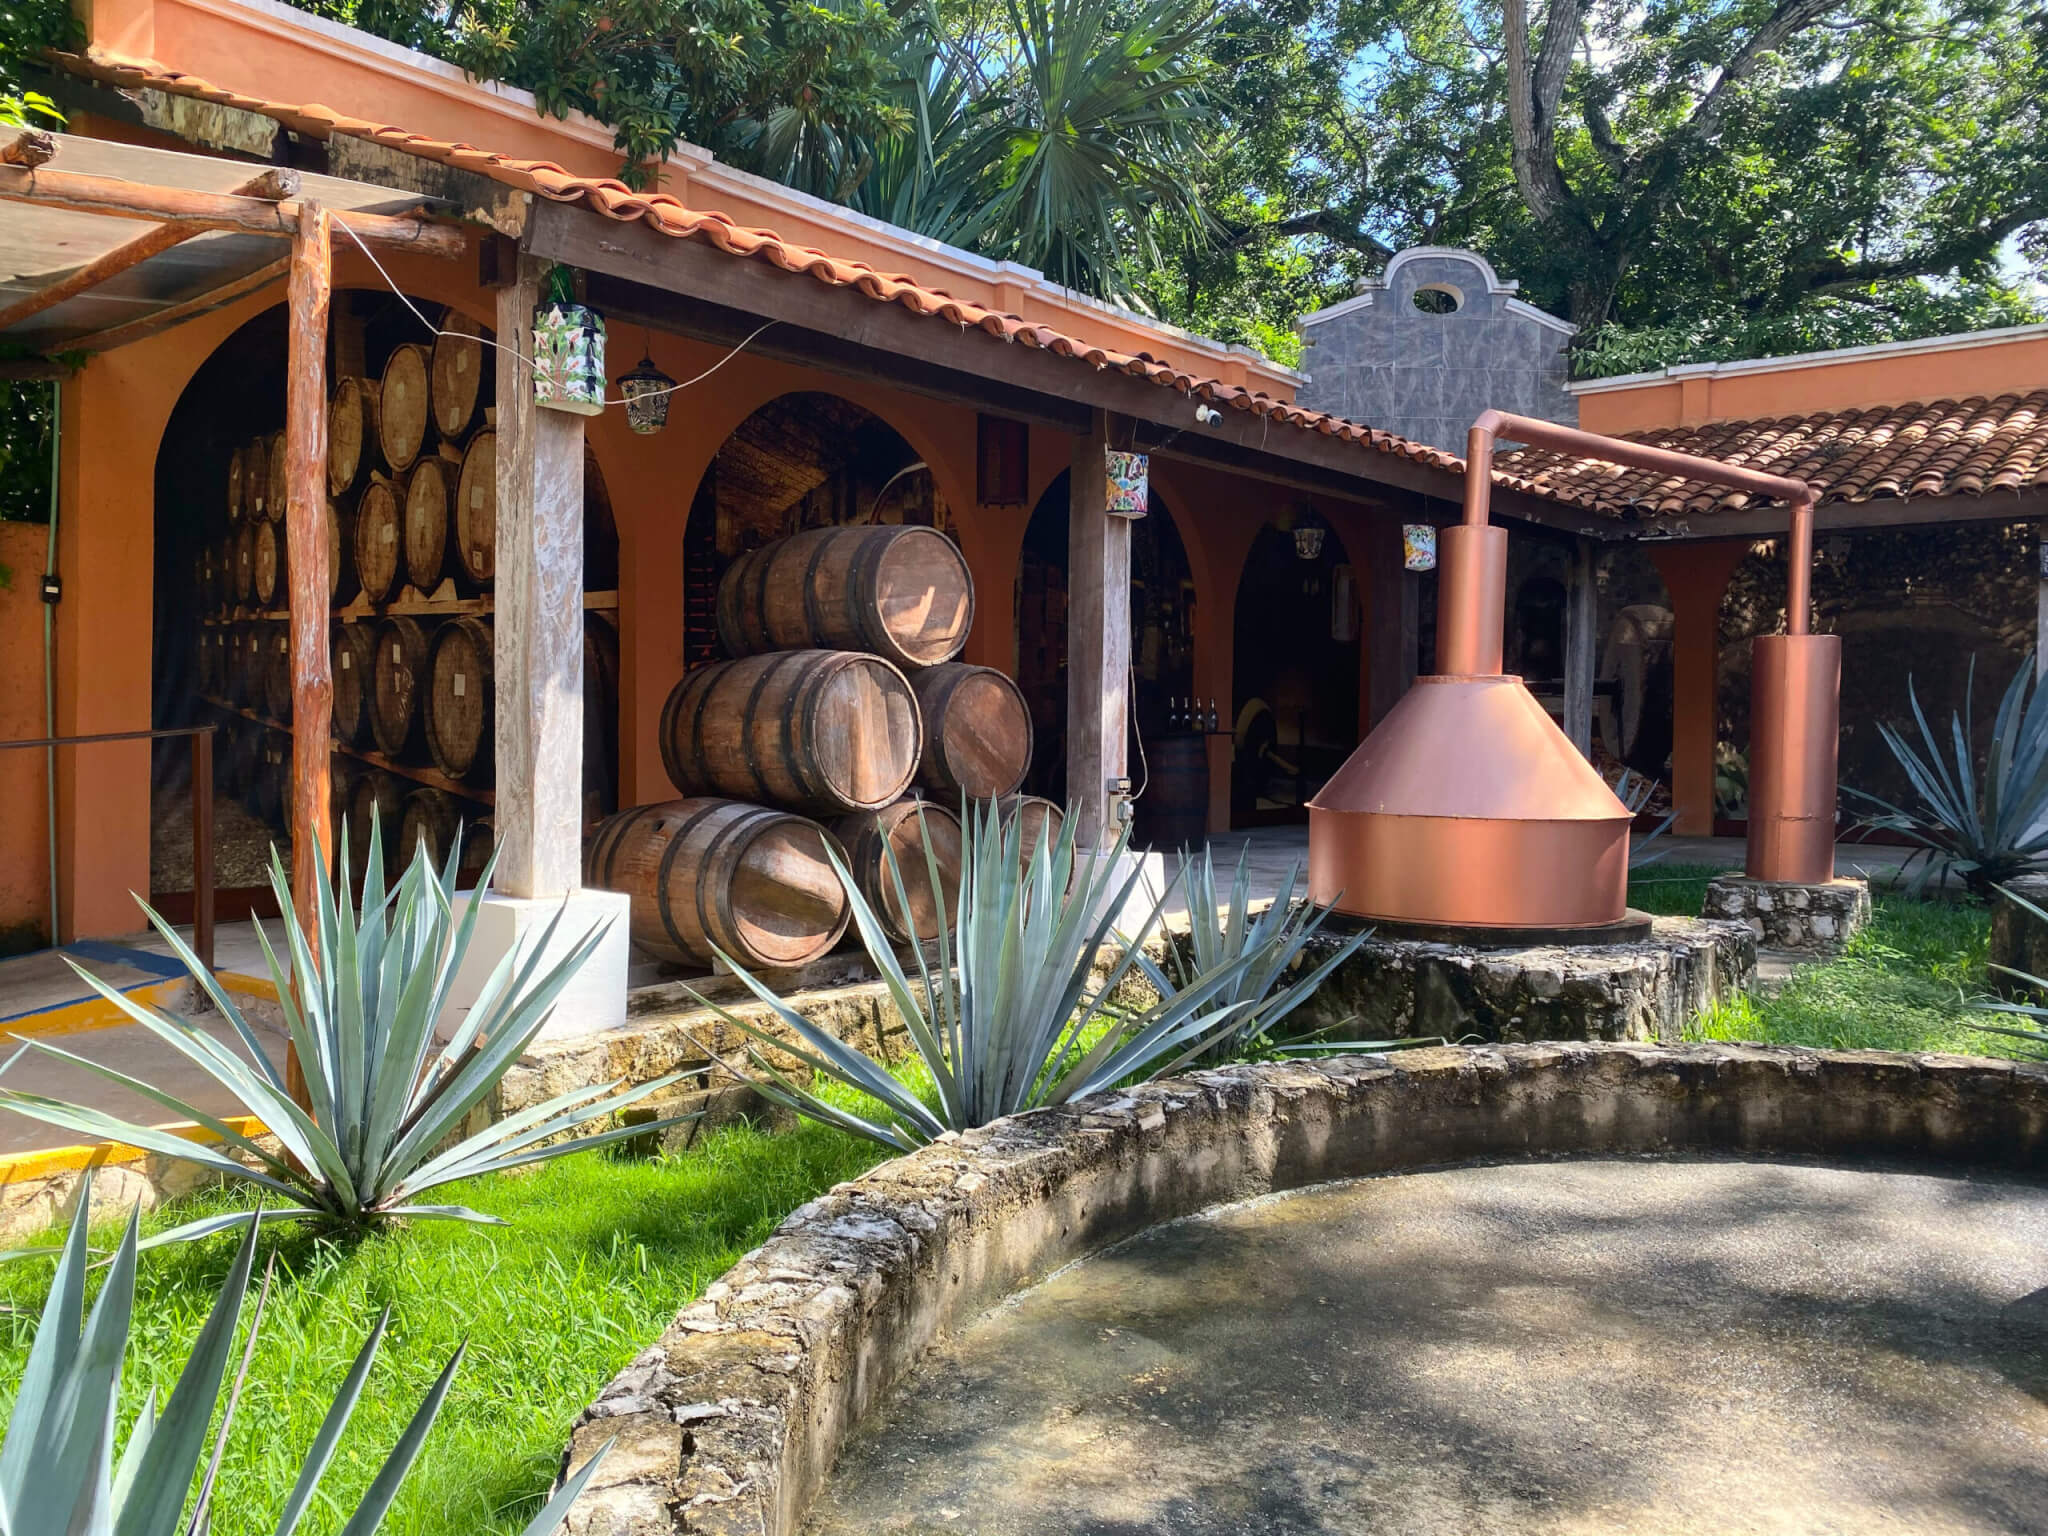 Production of tequila in Mexico. Old factory for the production of tequila. Side view of the barrels of alcohol in the yard of the factory. Concept of tourism and traditions.